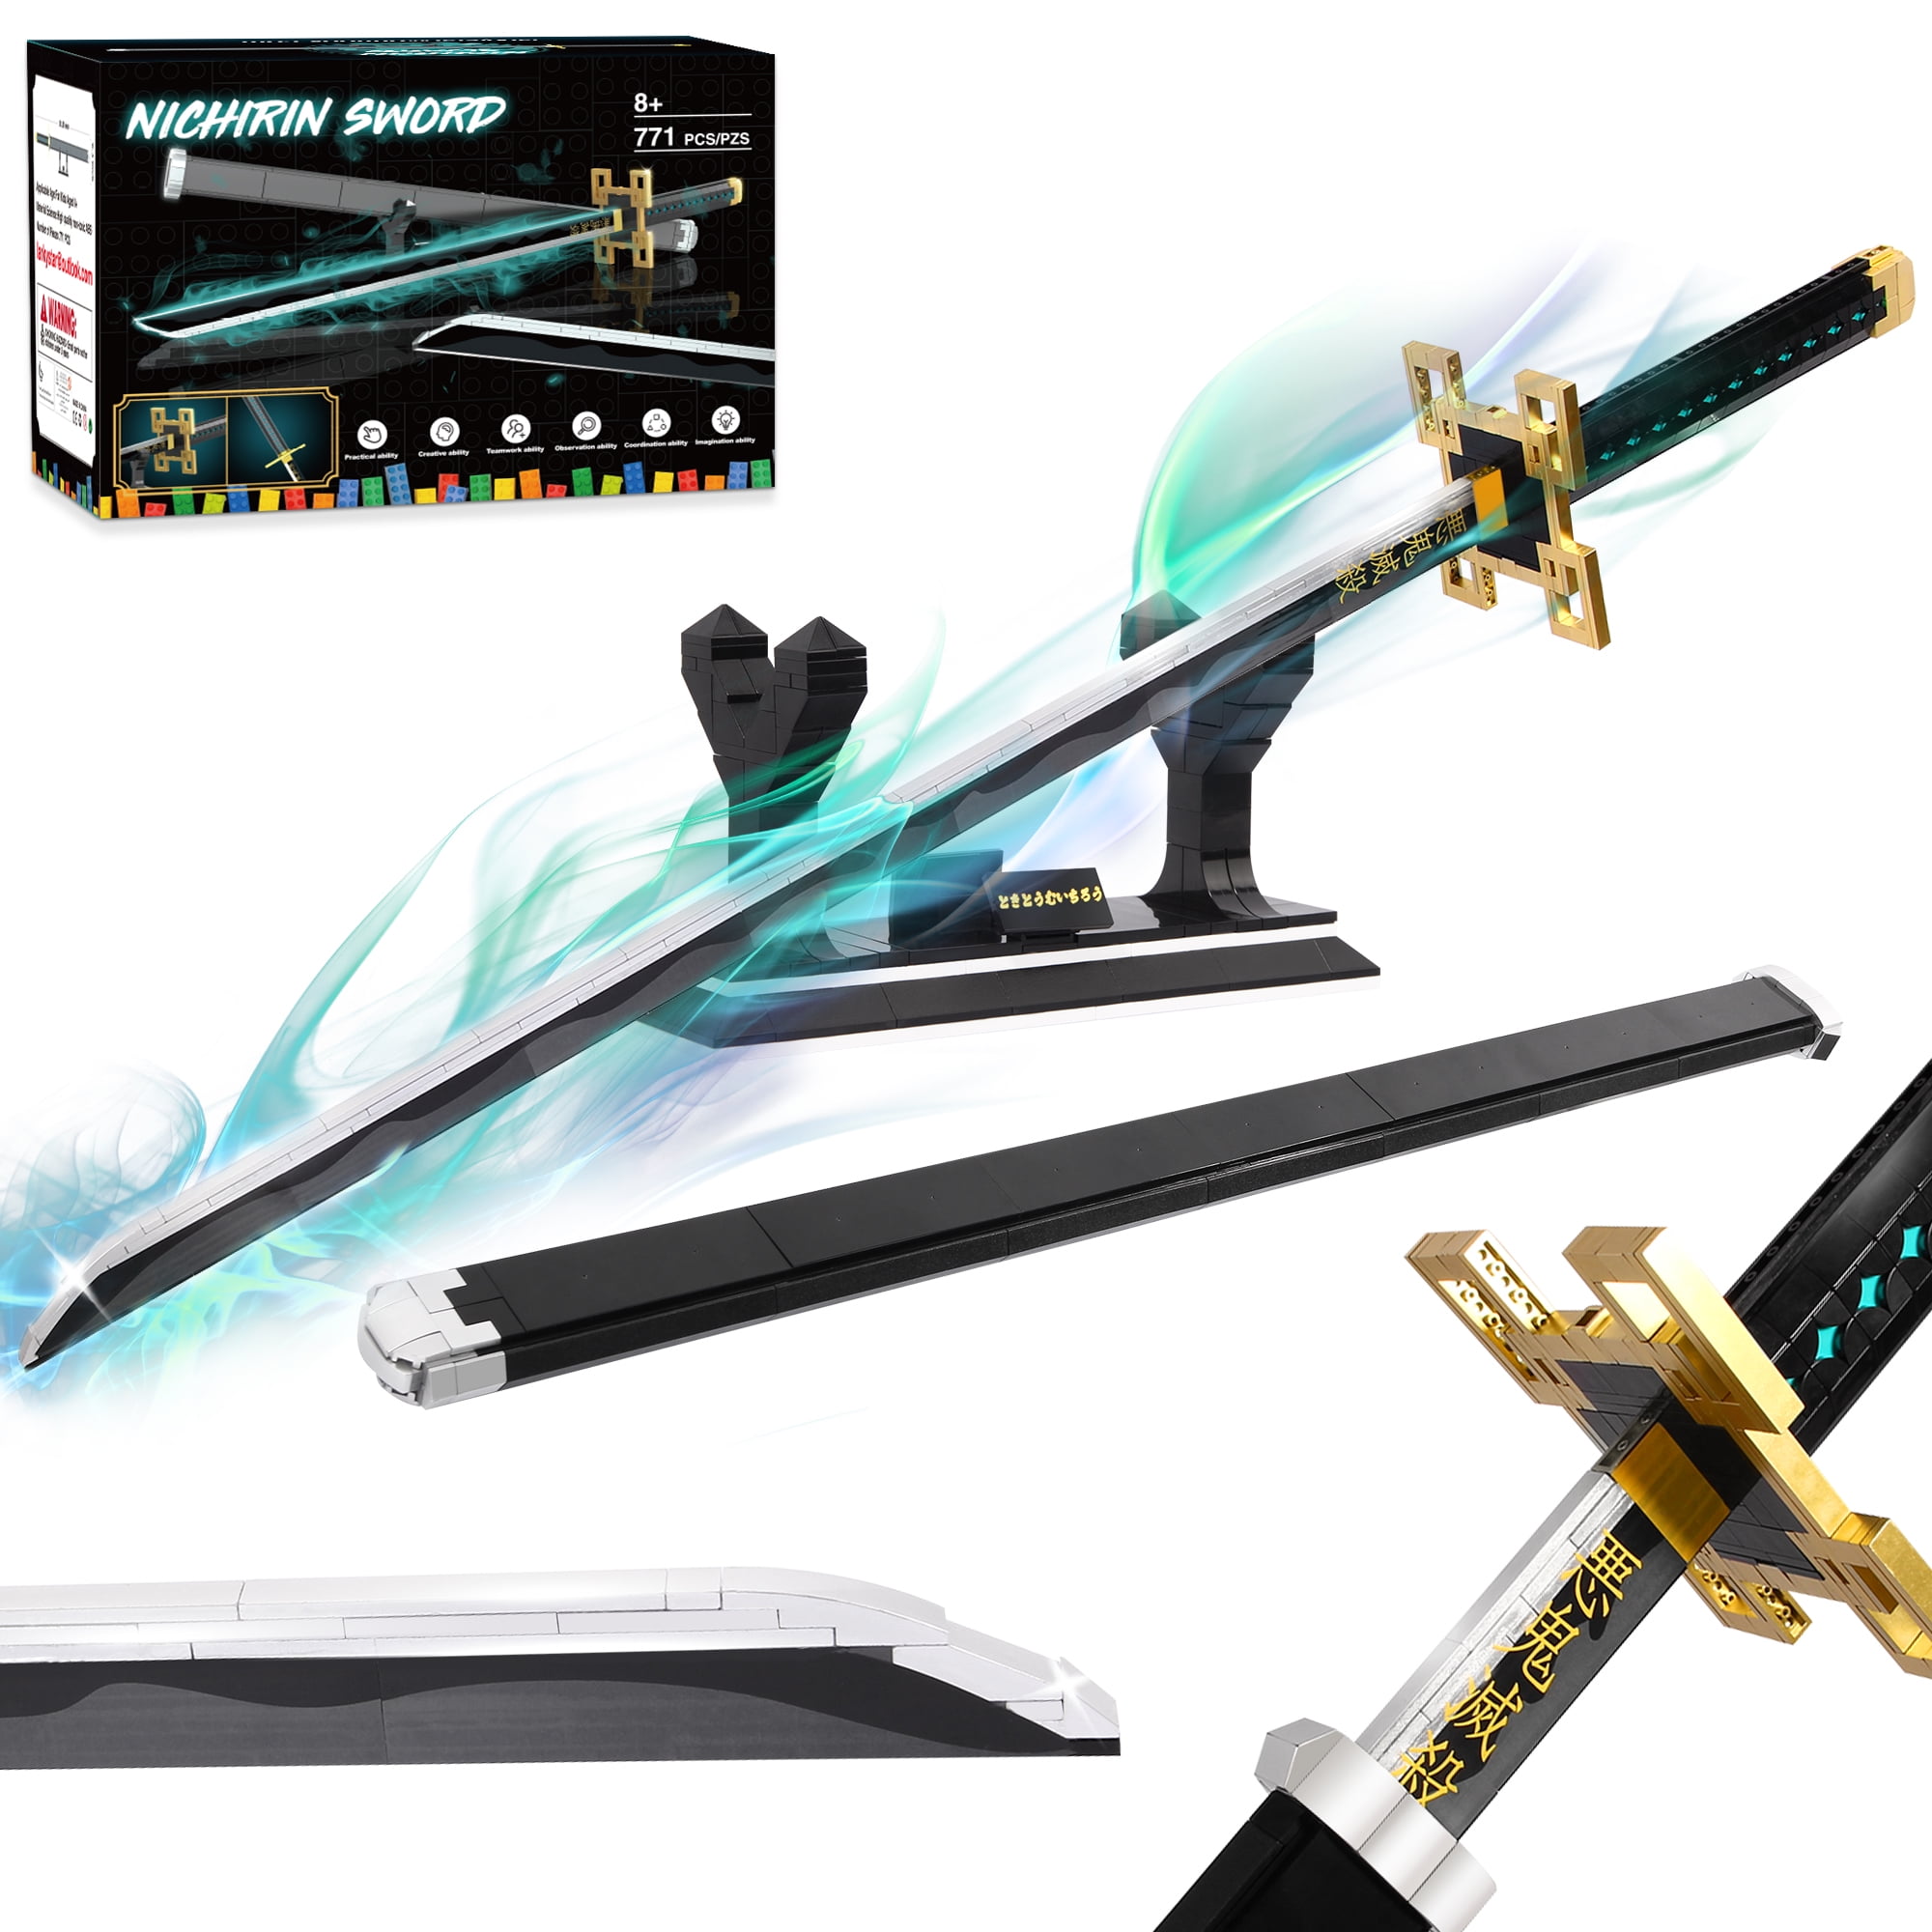 Demon Slayer Swords Compatible with Lego Sets for Girl 8-14, 39in Tsuyuri  Kanao Sword Building Block with Scabbard and Stand, Anime Sword Building  Toy